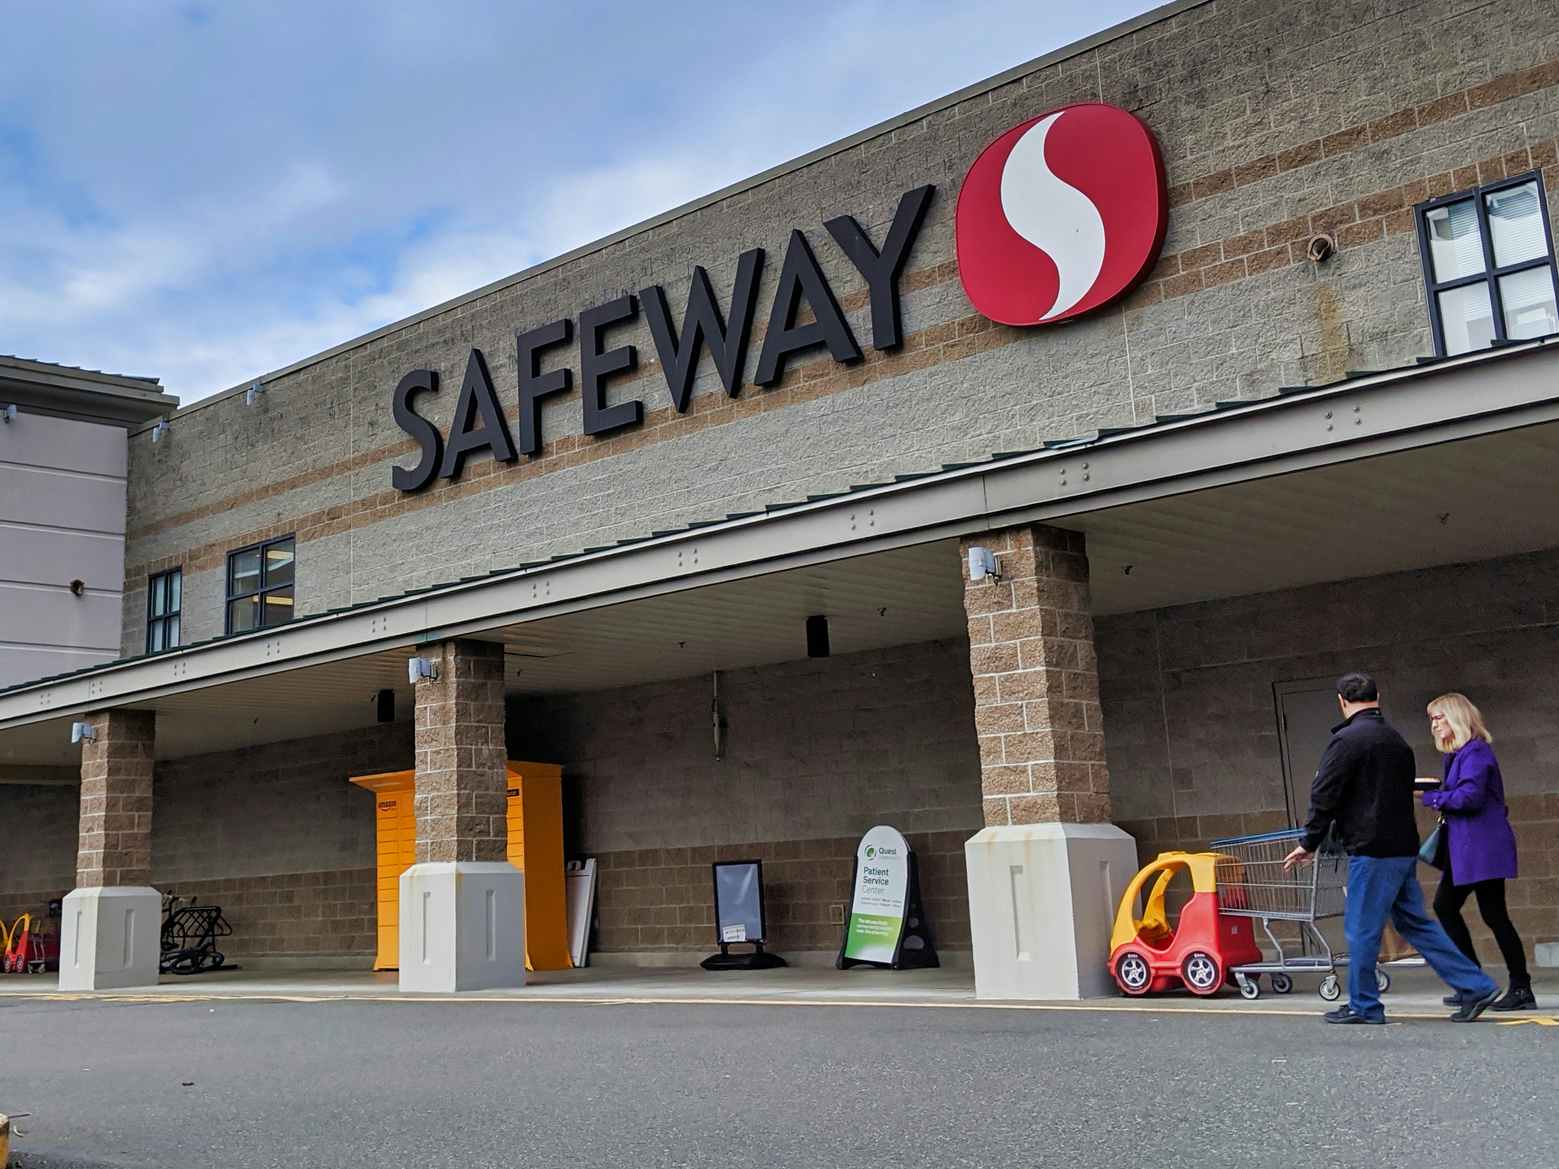 The exterior of a Safeway store